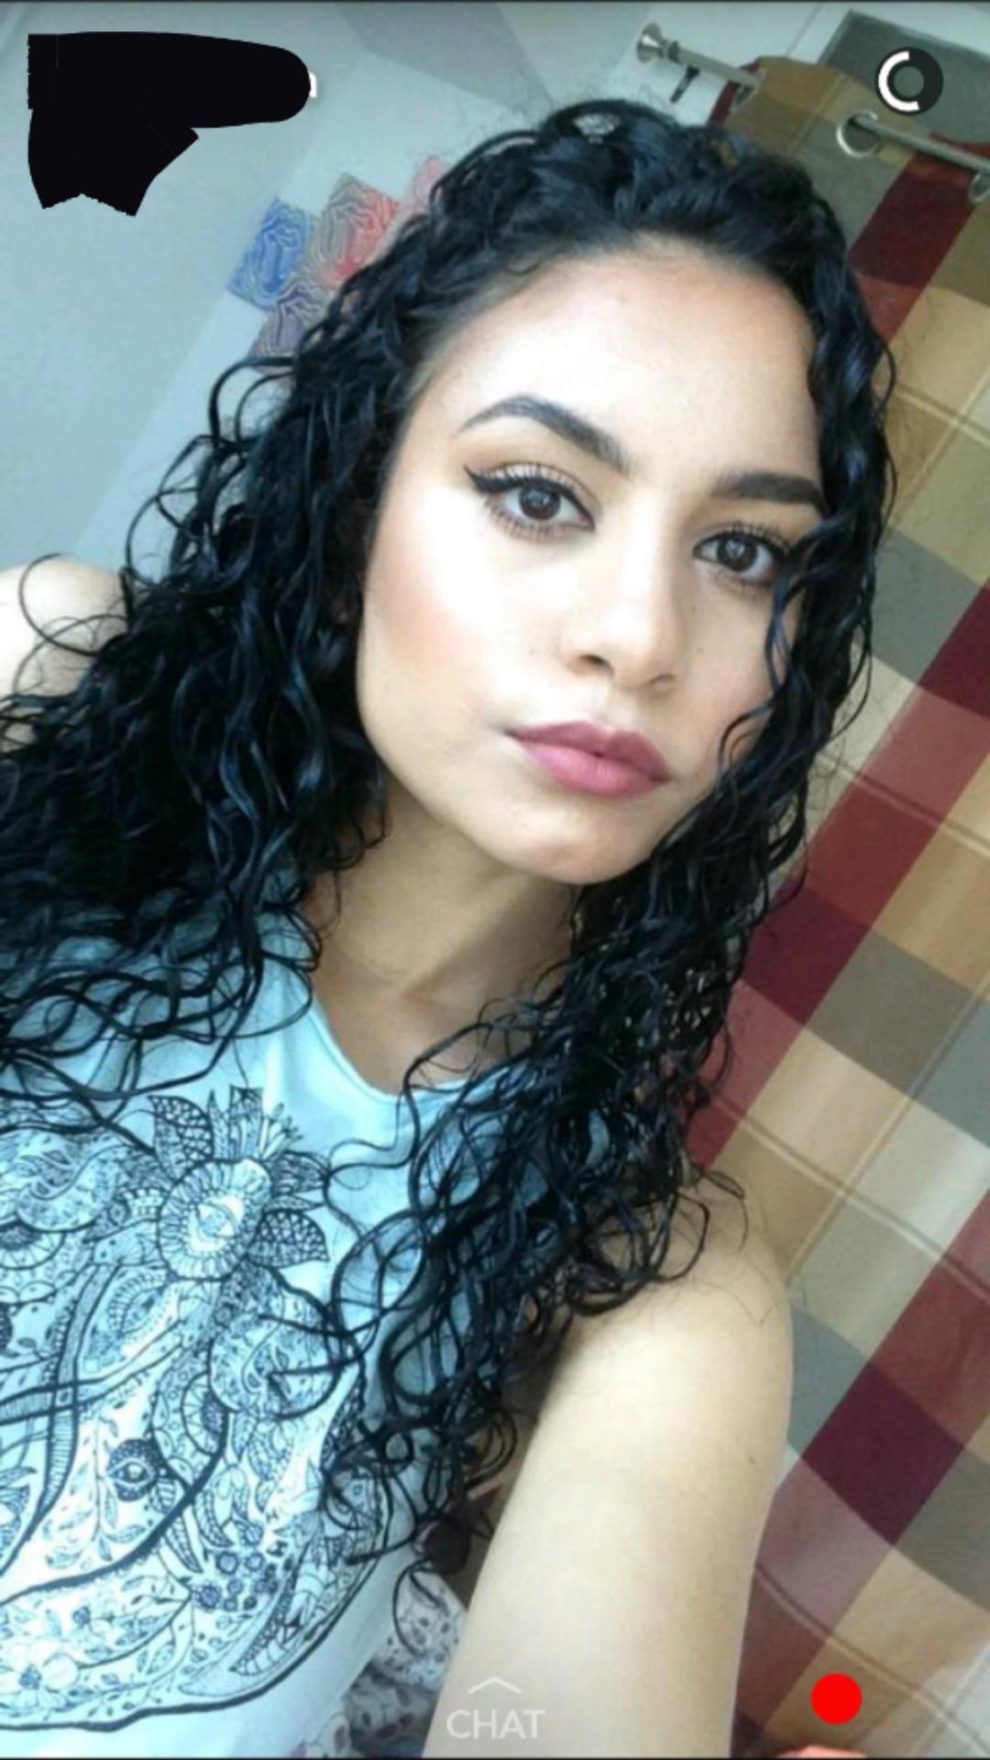 Cute newly 18 arab girl. What do you think of her and would do to her?